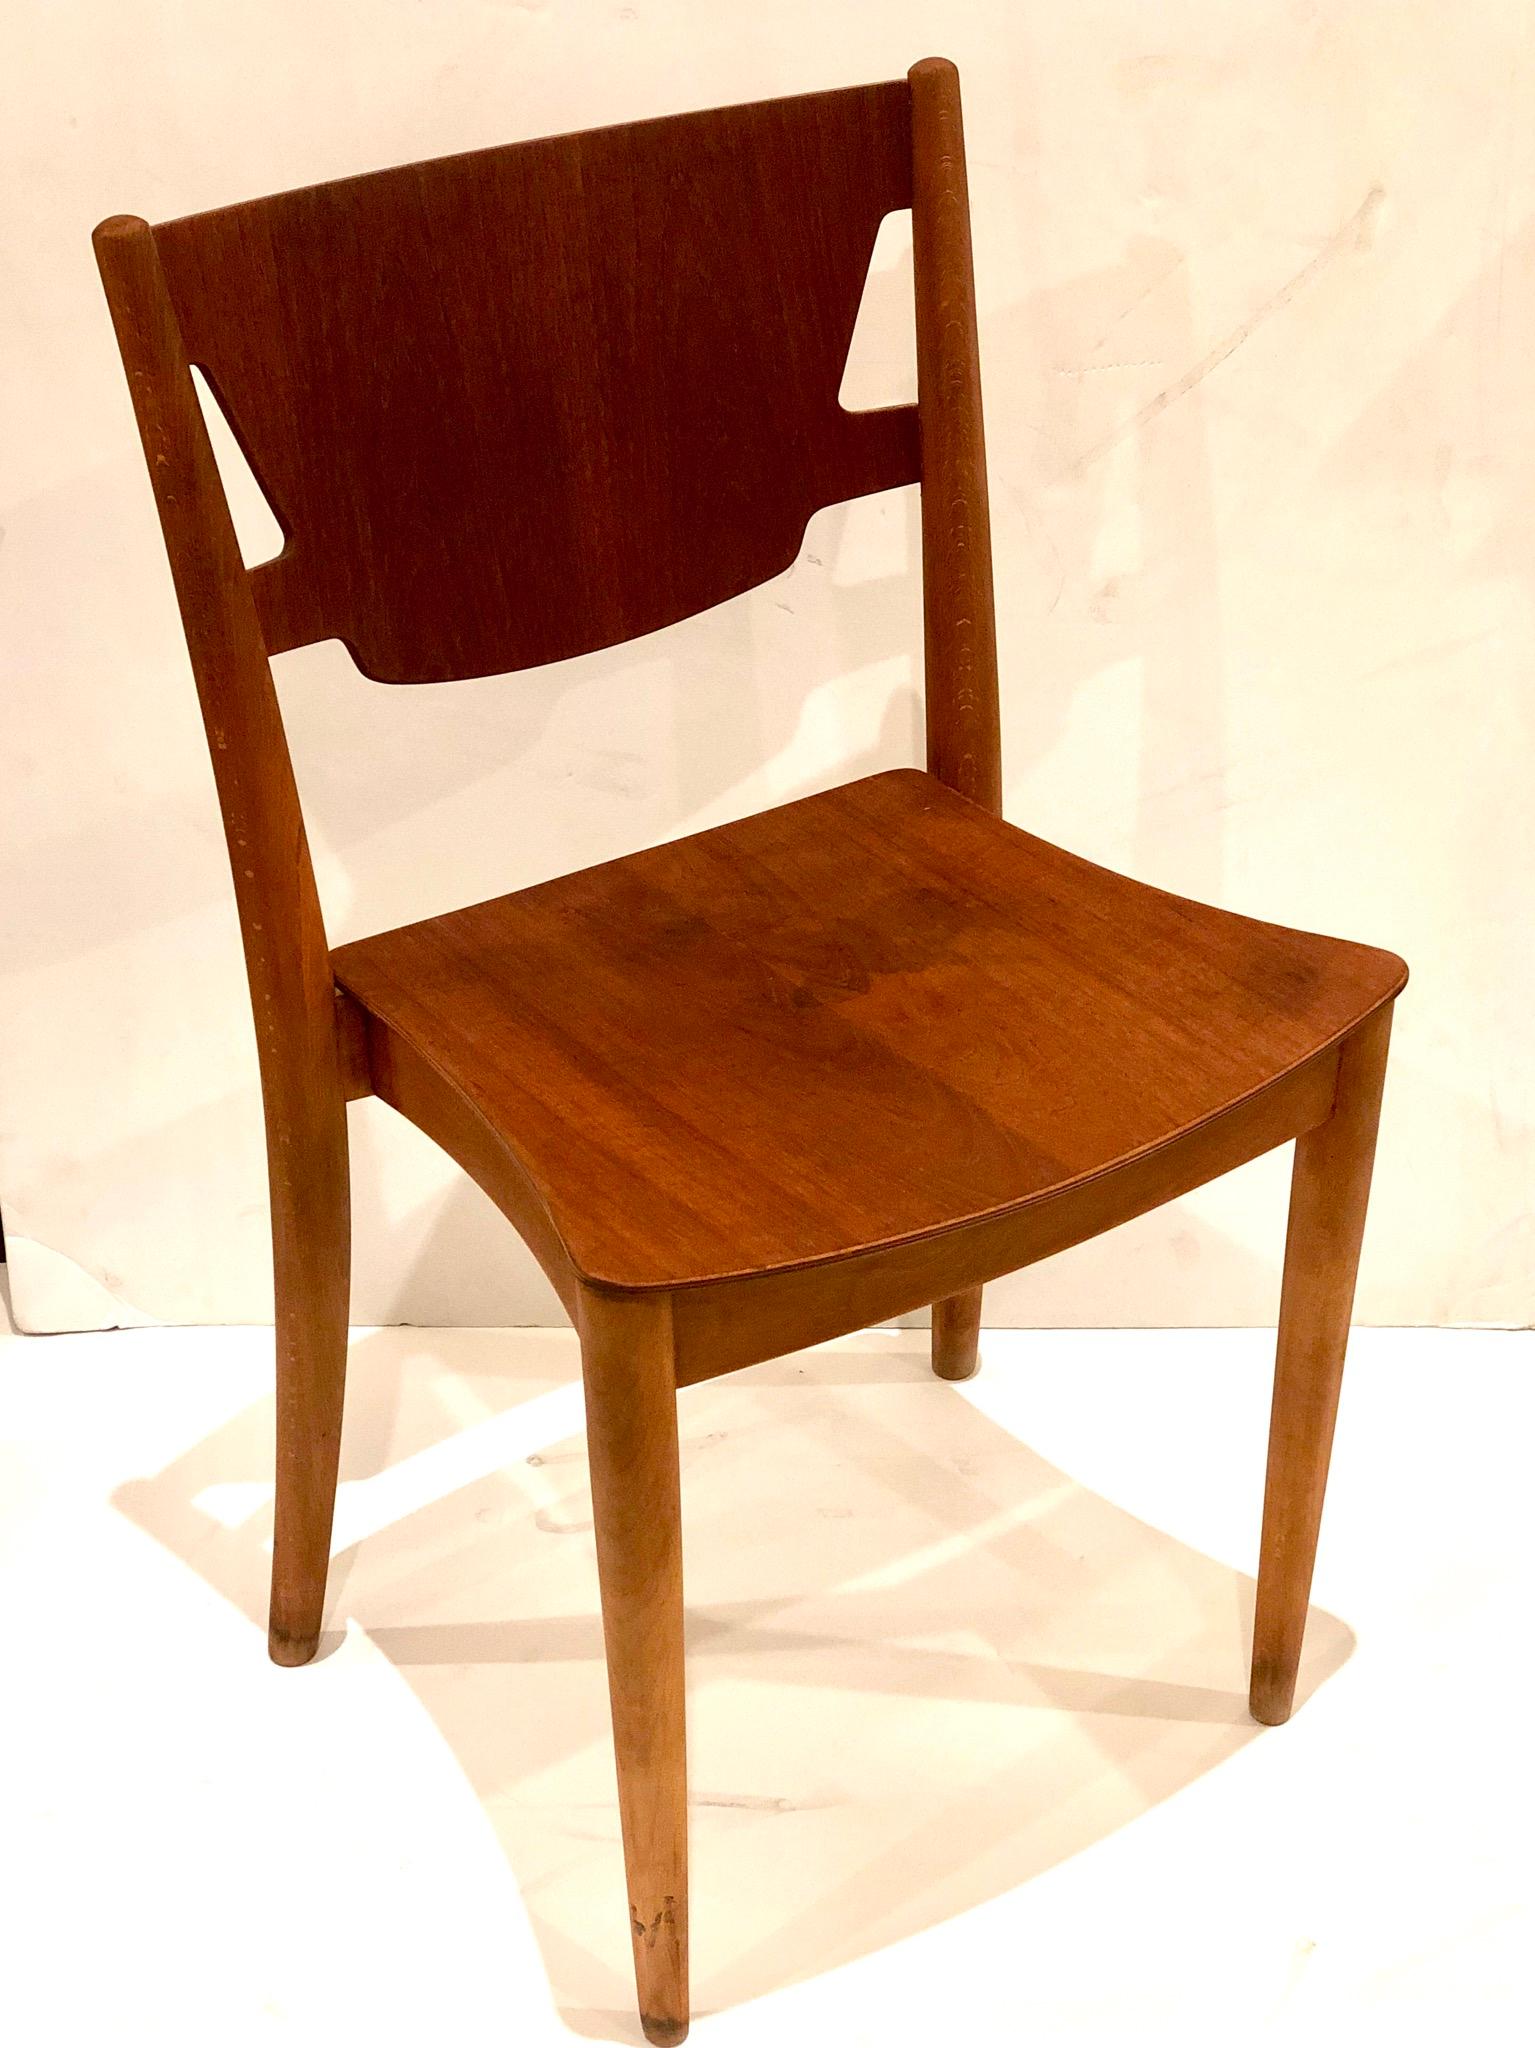 Beautiful single desk chair designed by Borge Mogensen for CM Madsen teak seat and back with oak frame ,we have cleaned and light sanded the chair, its solid and sturdy with some stains as shown due to age, this is a very rare chair only a small